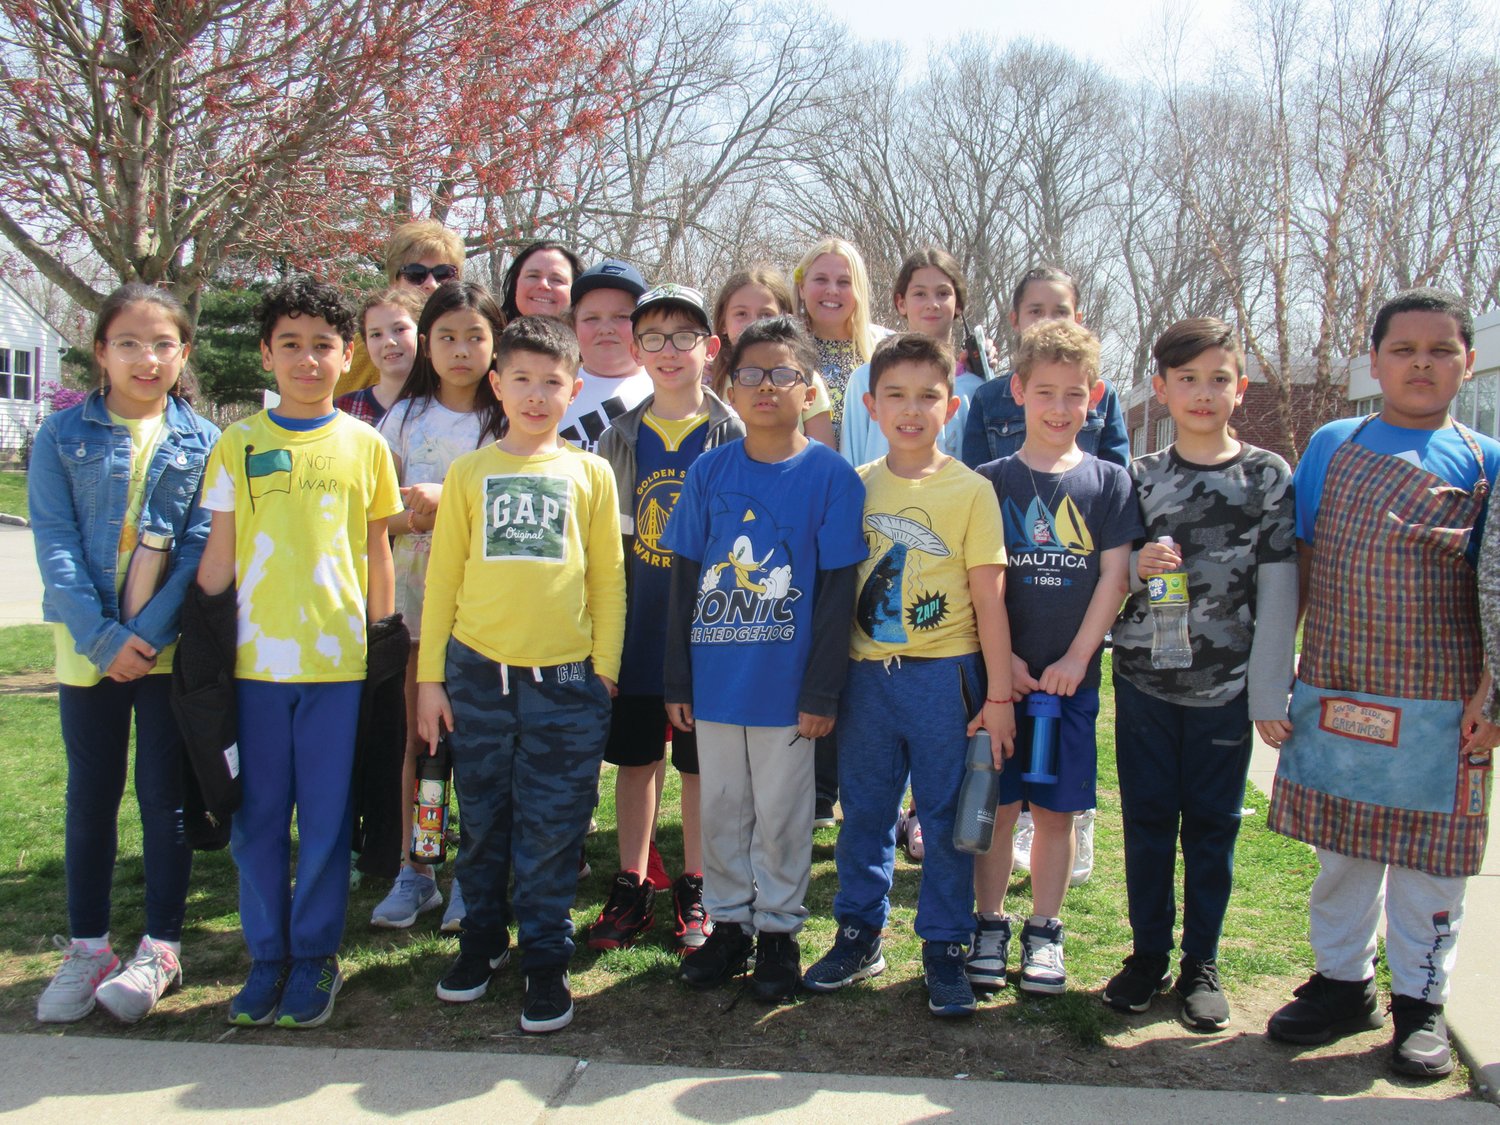 CLASSIC COLLECTORS: This is one of the many groups of Winsor Hill students who participated in the recent “Walk for the Ukraine” that raised $1,350 that will help people in the war-ravaged country.